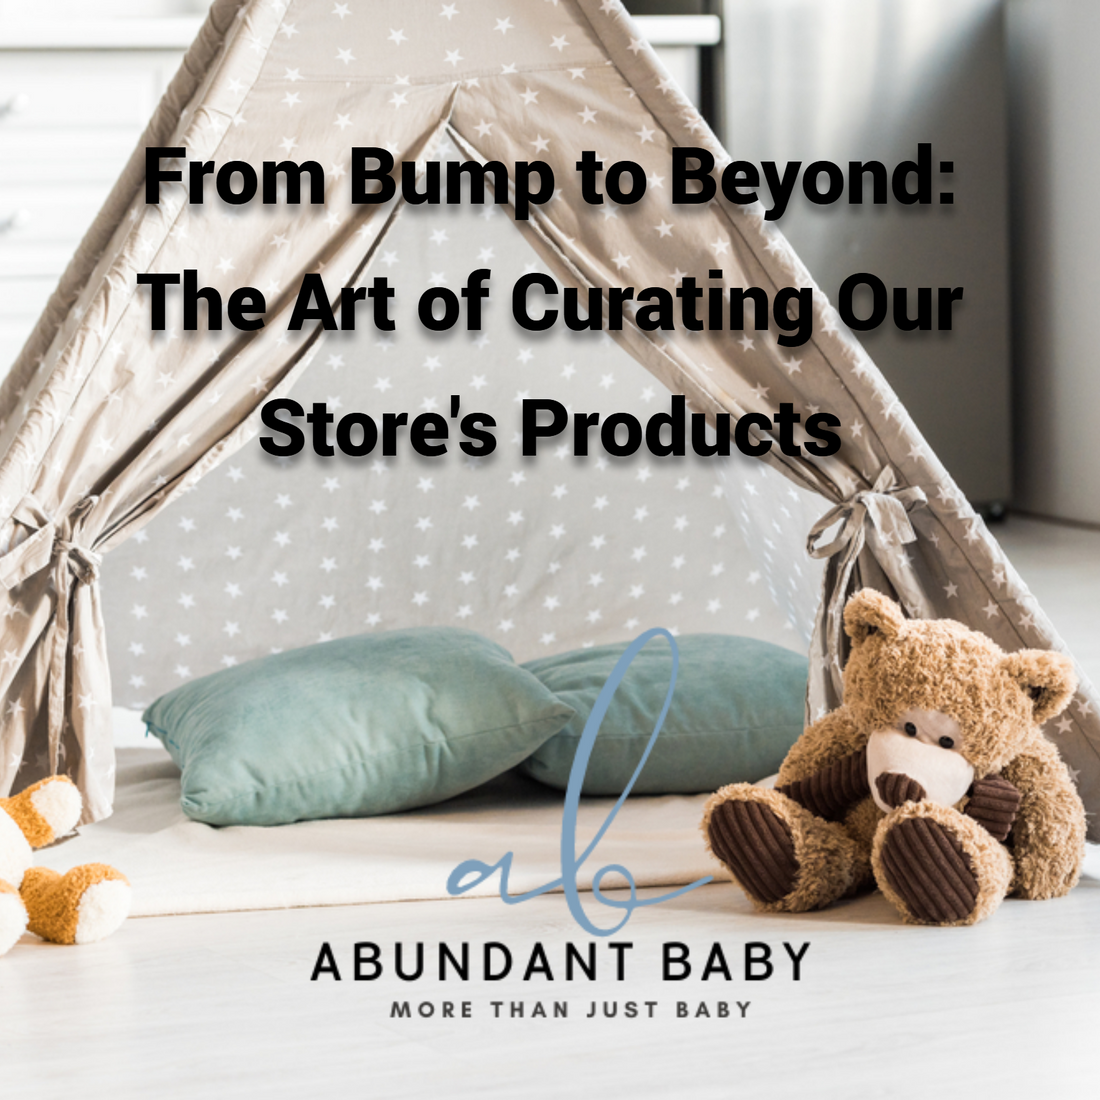 From Bump to Beyond: The Art of Curating Our Store's Products